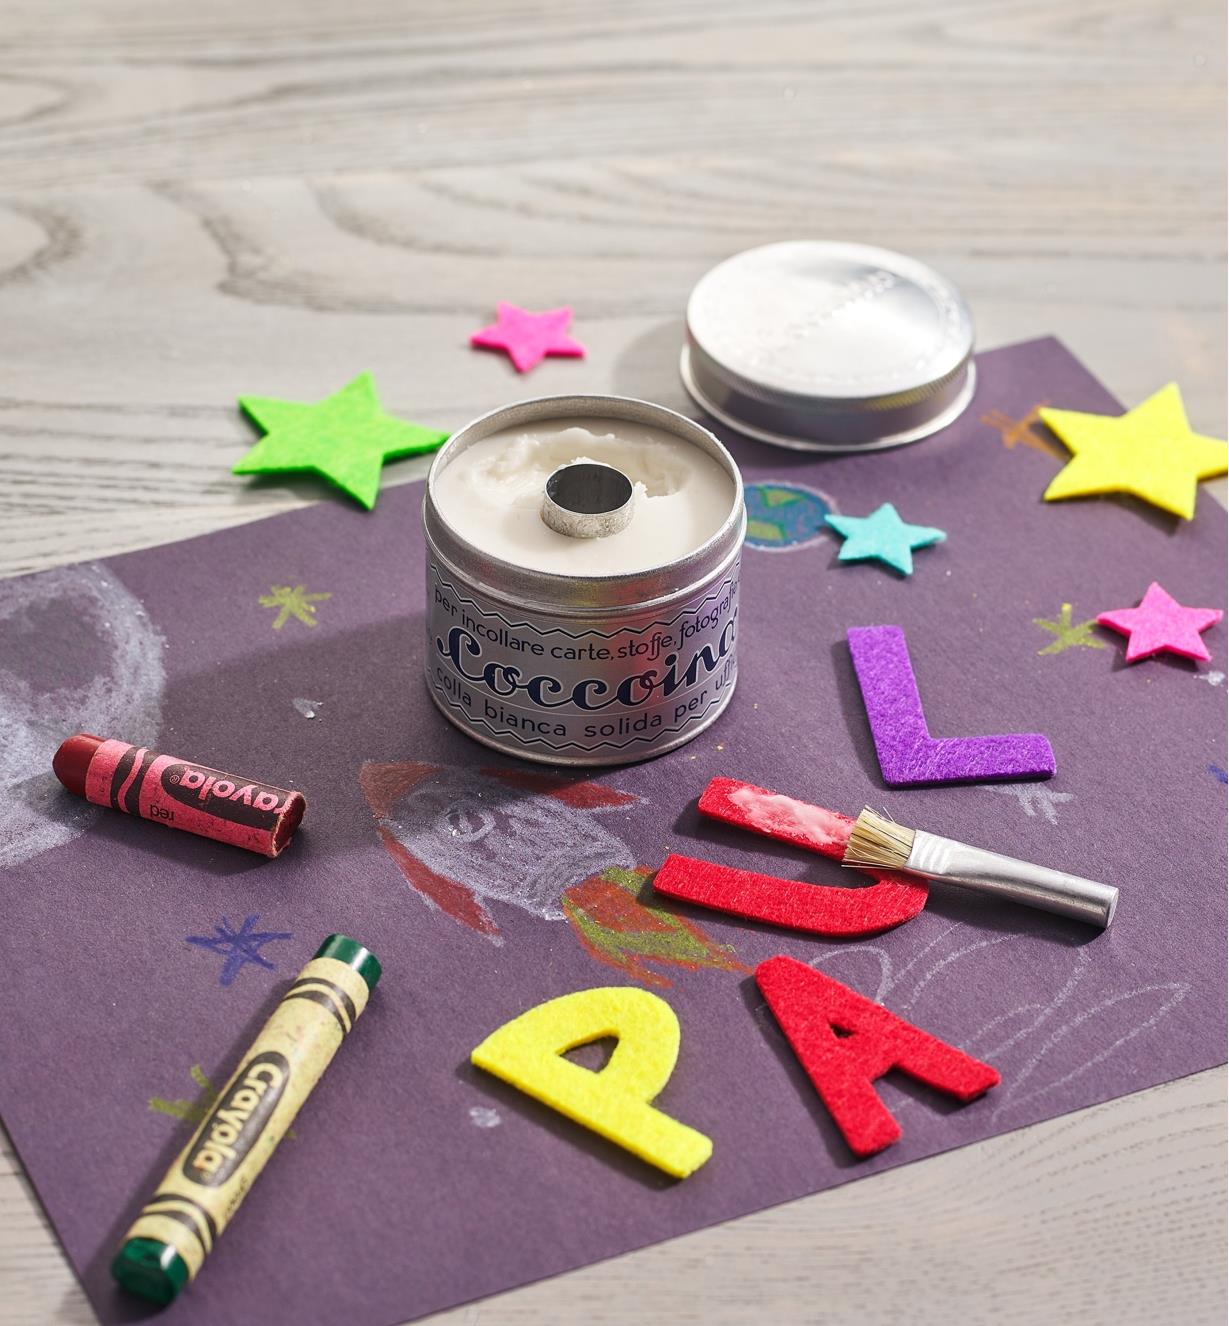 An open tin of paste glue on a piece of purple paper with partially glued cut-out letters